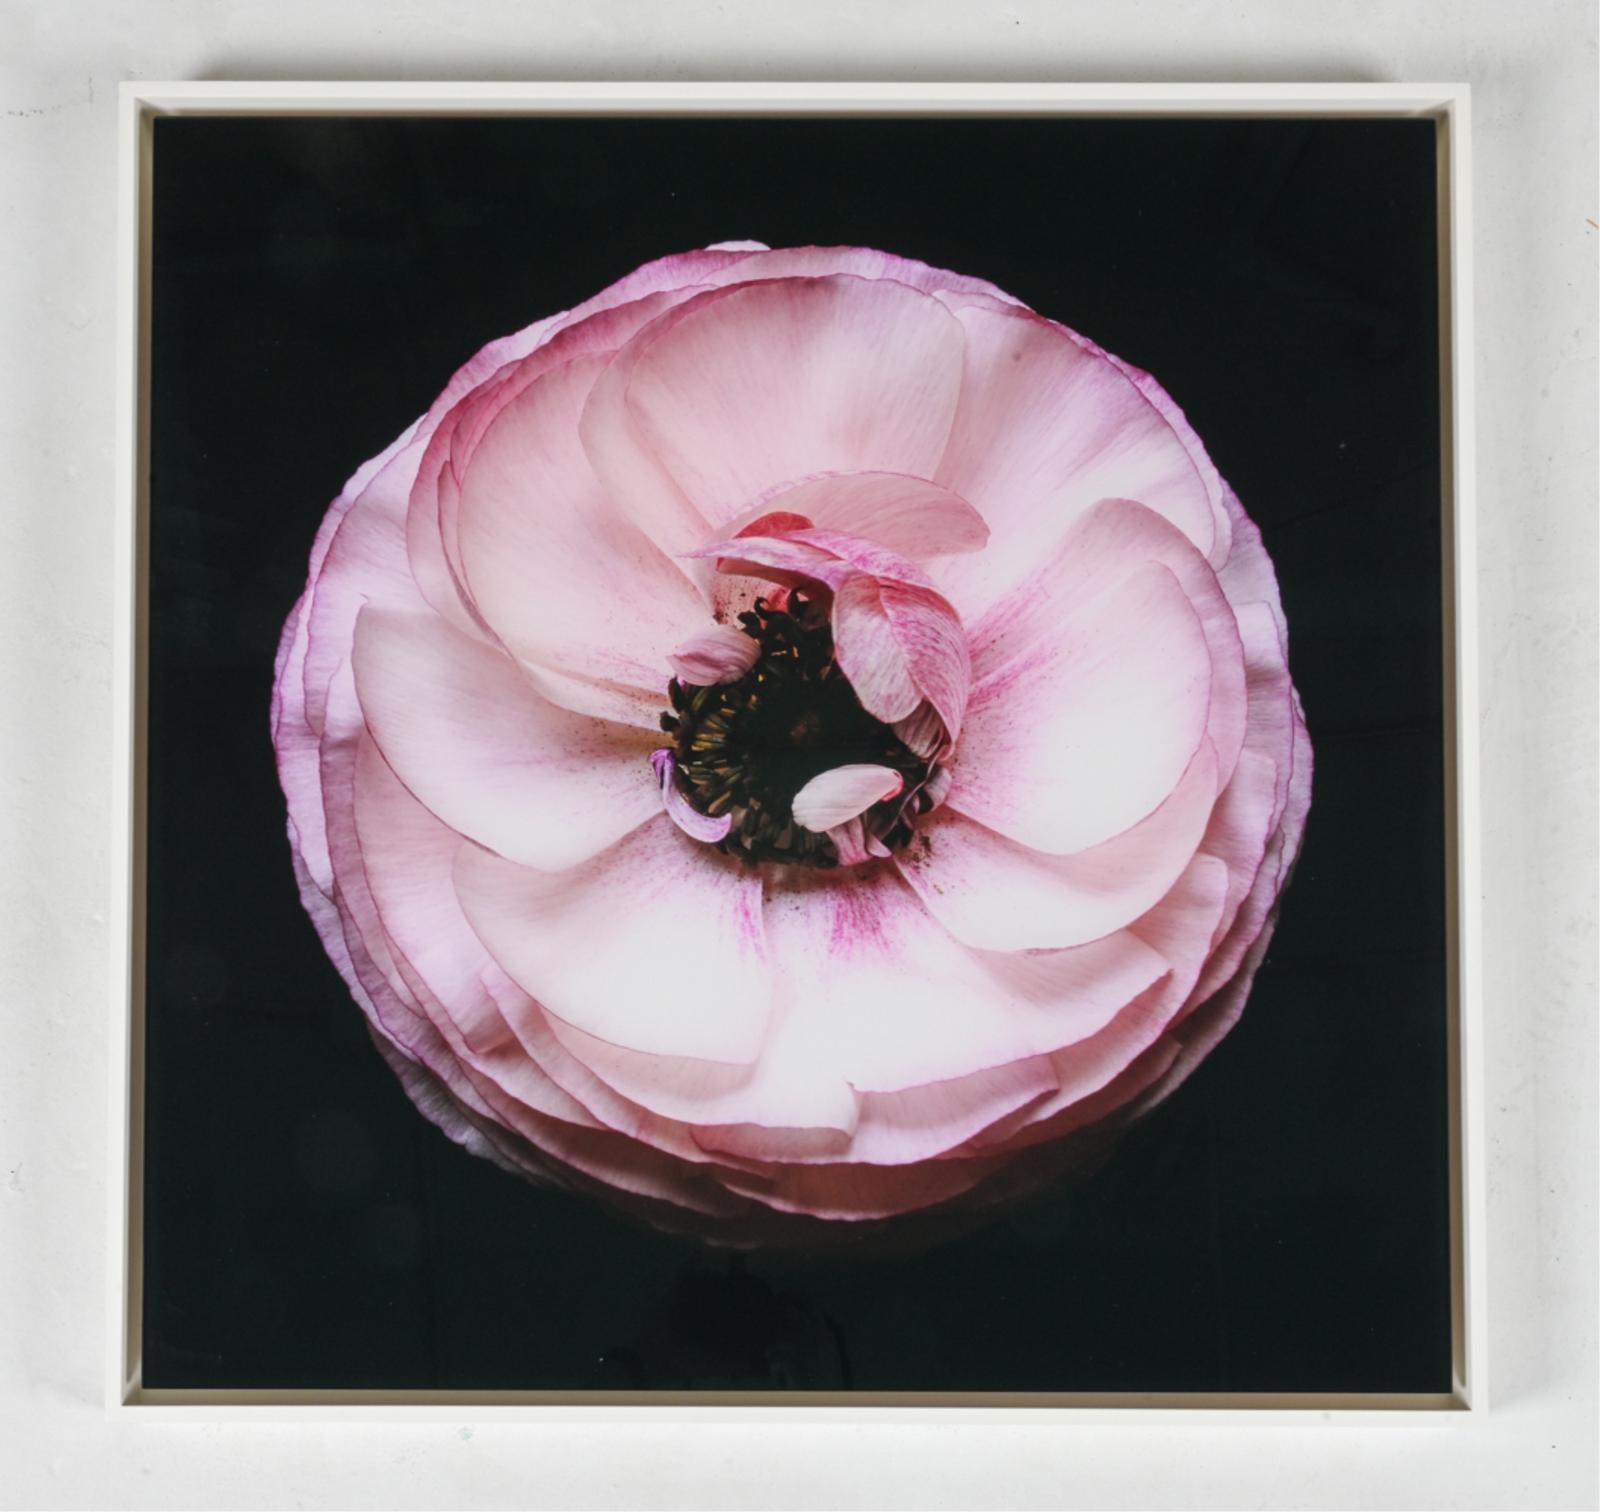 Christopher Beane Color Photograph - Ranuculus series - "Sister of Eclipse"